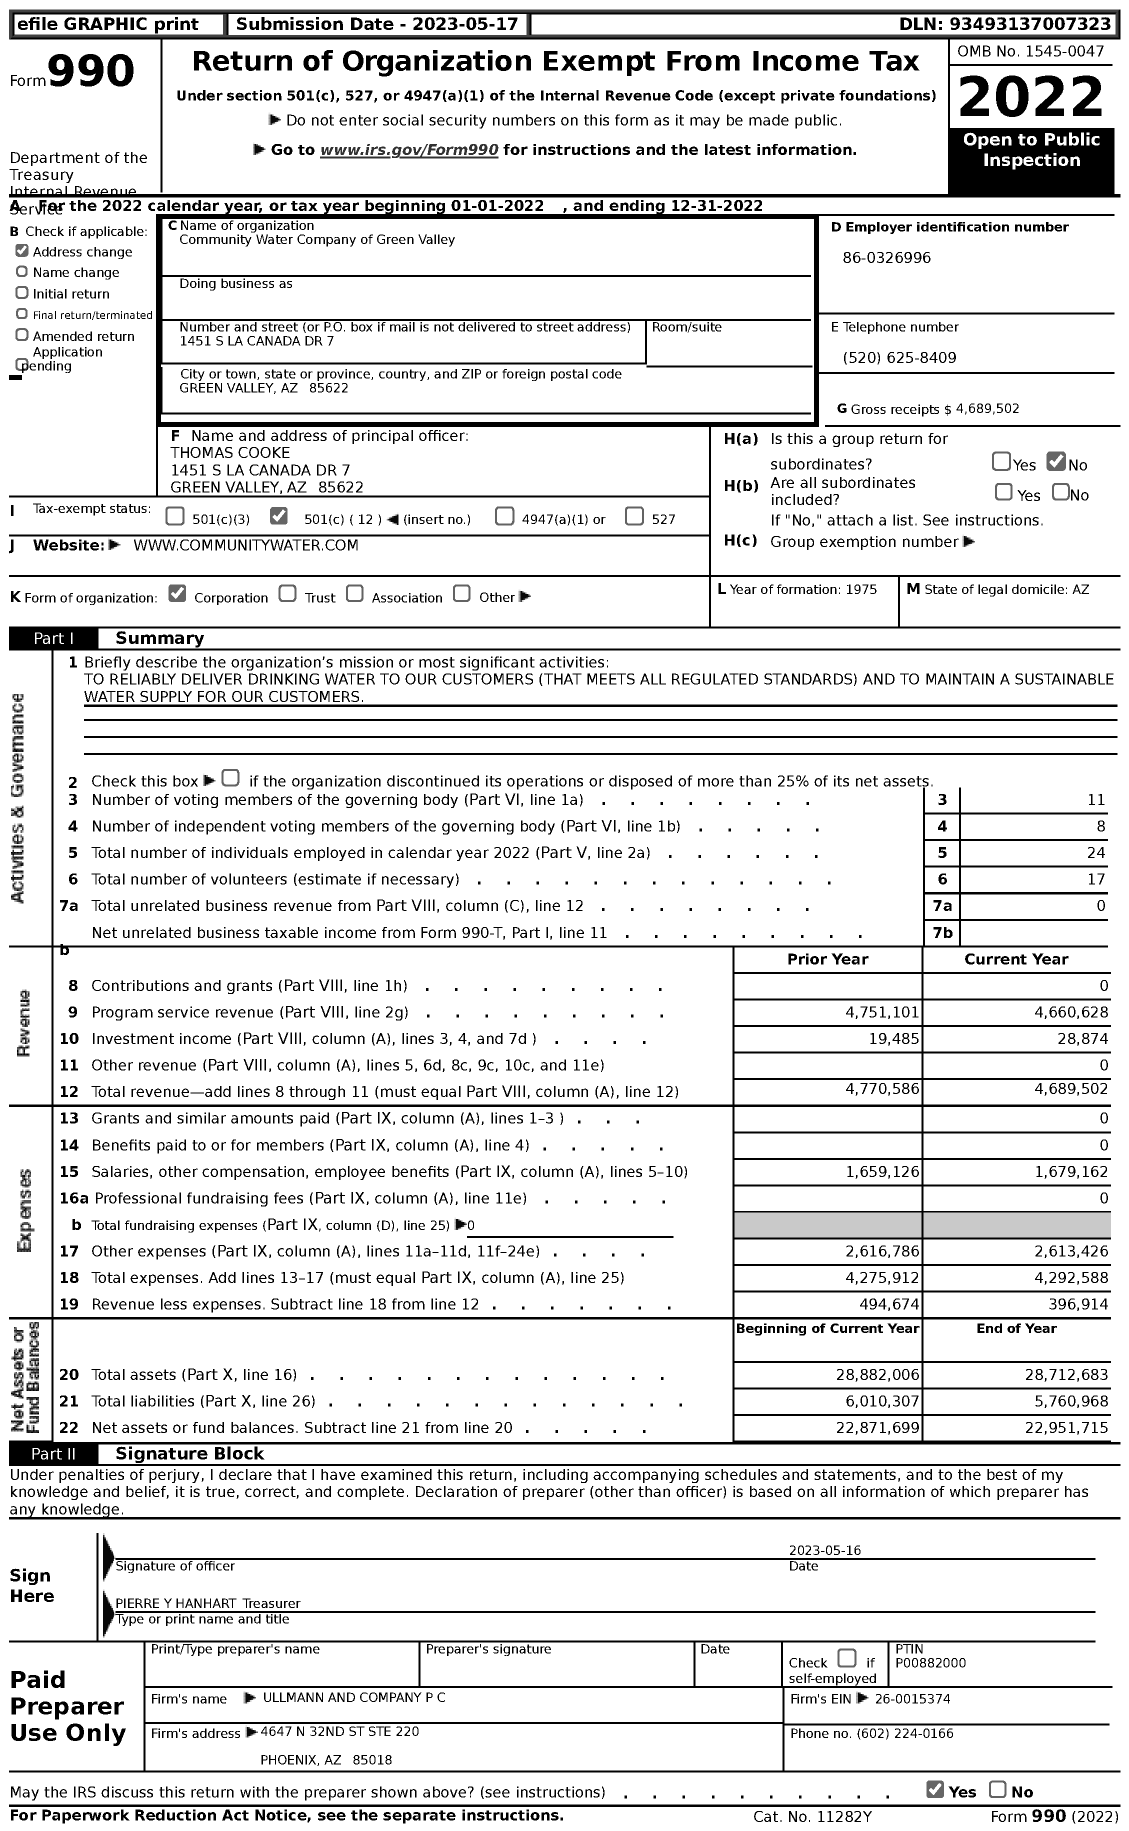 Image of first page of 2022 Form 990 for Community Water Company of Green Valley